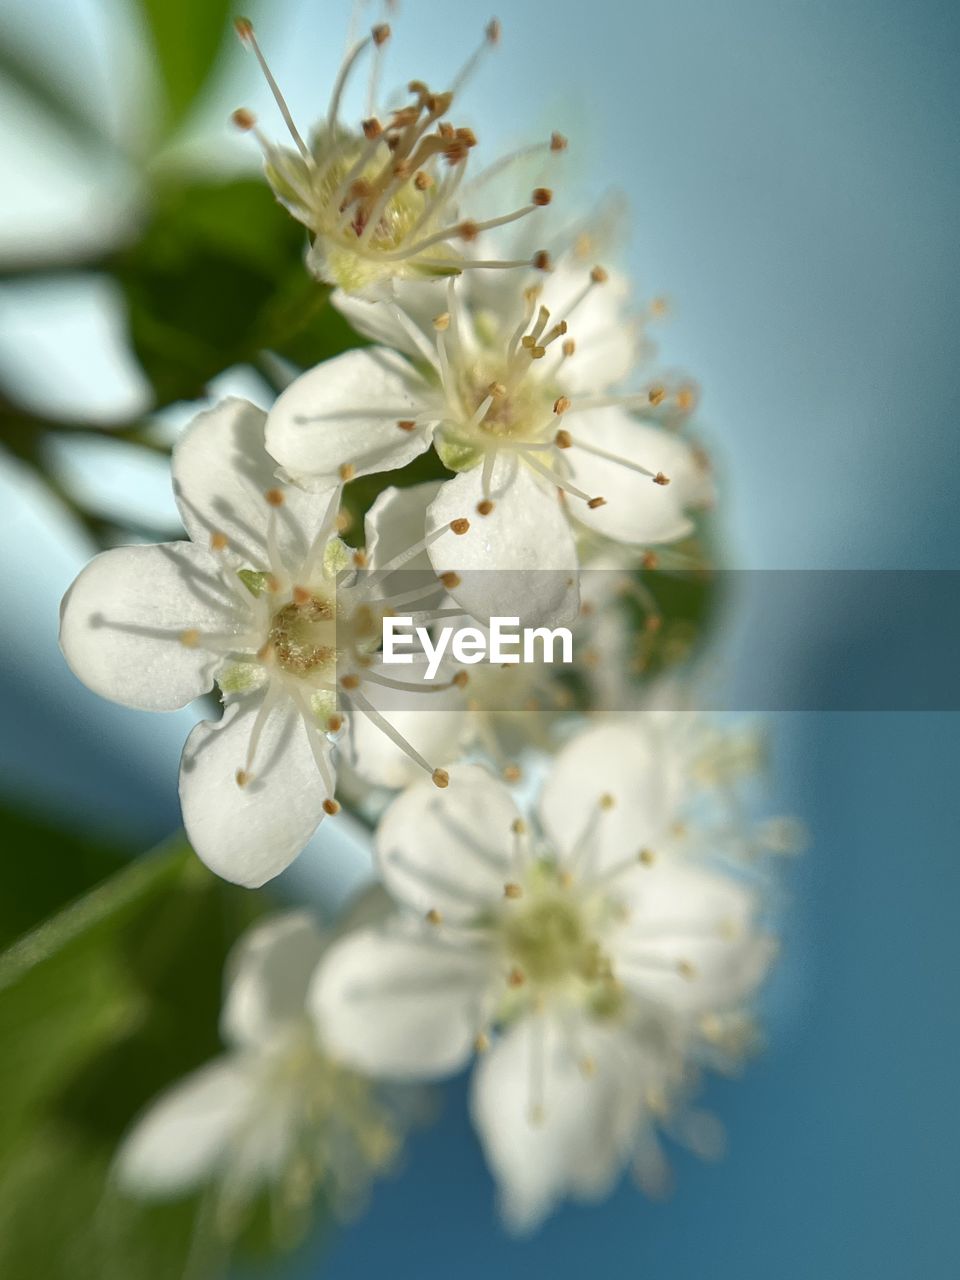 plant, flower, flowering plant, freshness, beauty in nature, blossom, fragility, springtime, nature, white, close-up, tree, growth, food, produce, flower head, branch, inflorescence, macro photography, fruit tree, no people, pollen, food and drink, focus on foreground, petal, fruit, outdoors, botany, stamen, selective focus, day, blue, almond tree, twig, sky, apple tree, prunus spinosa, cherry blossom